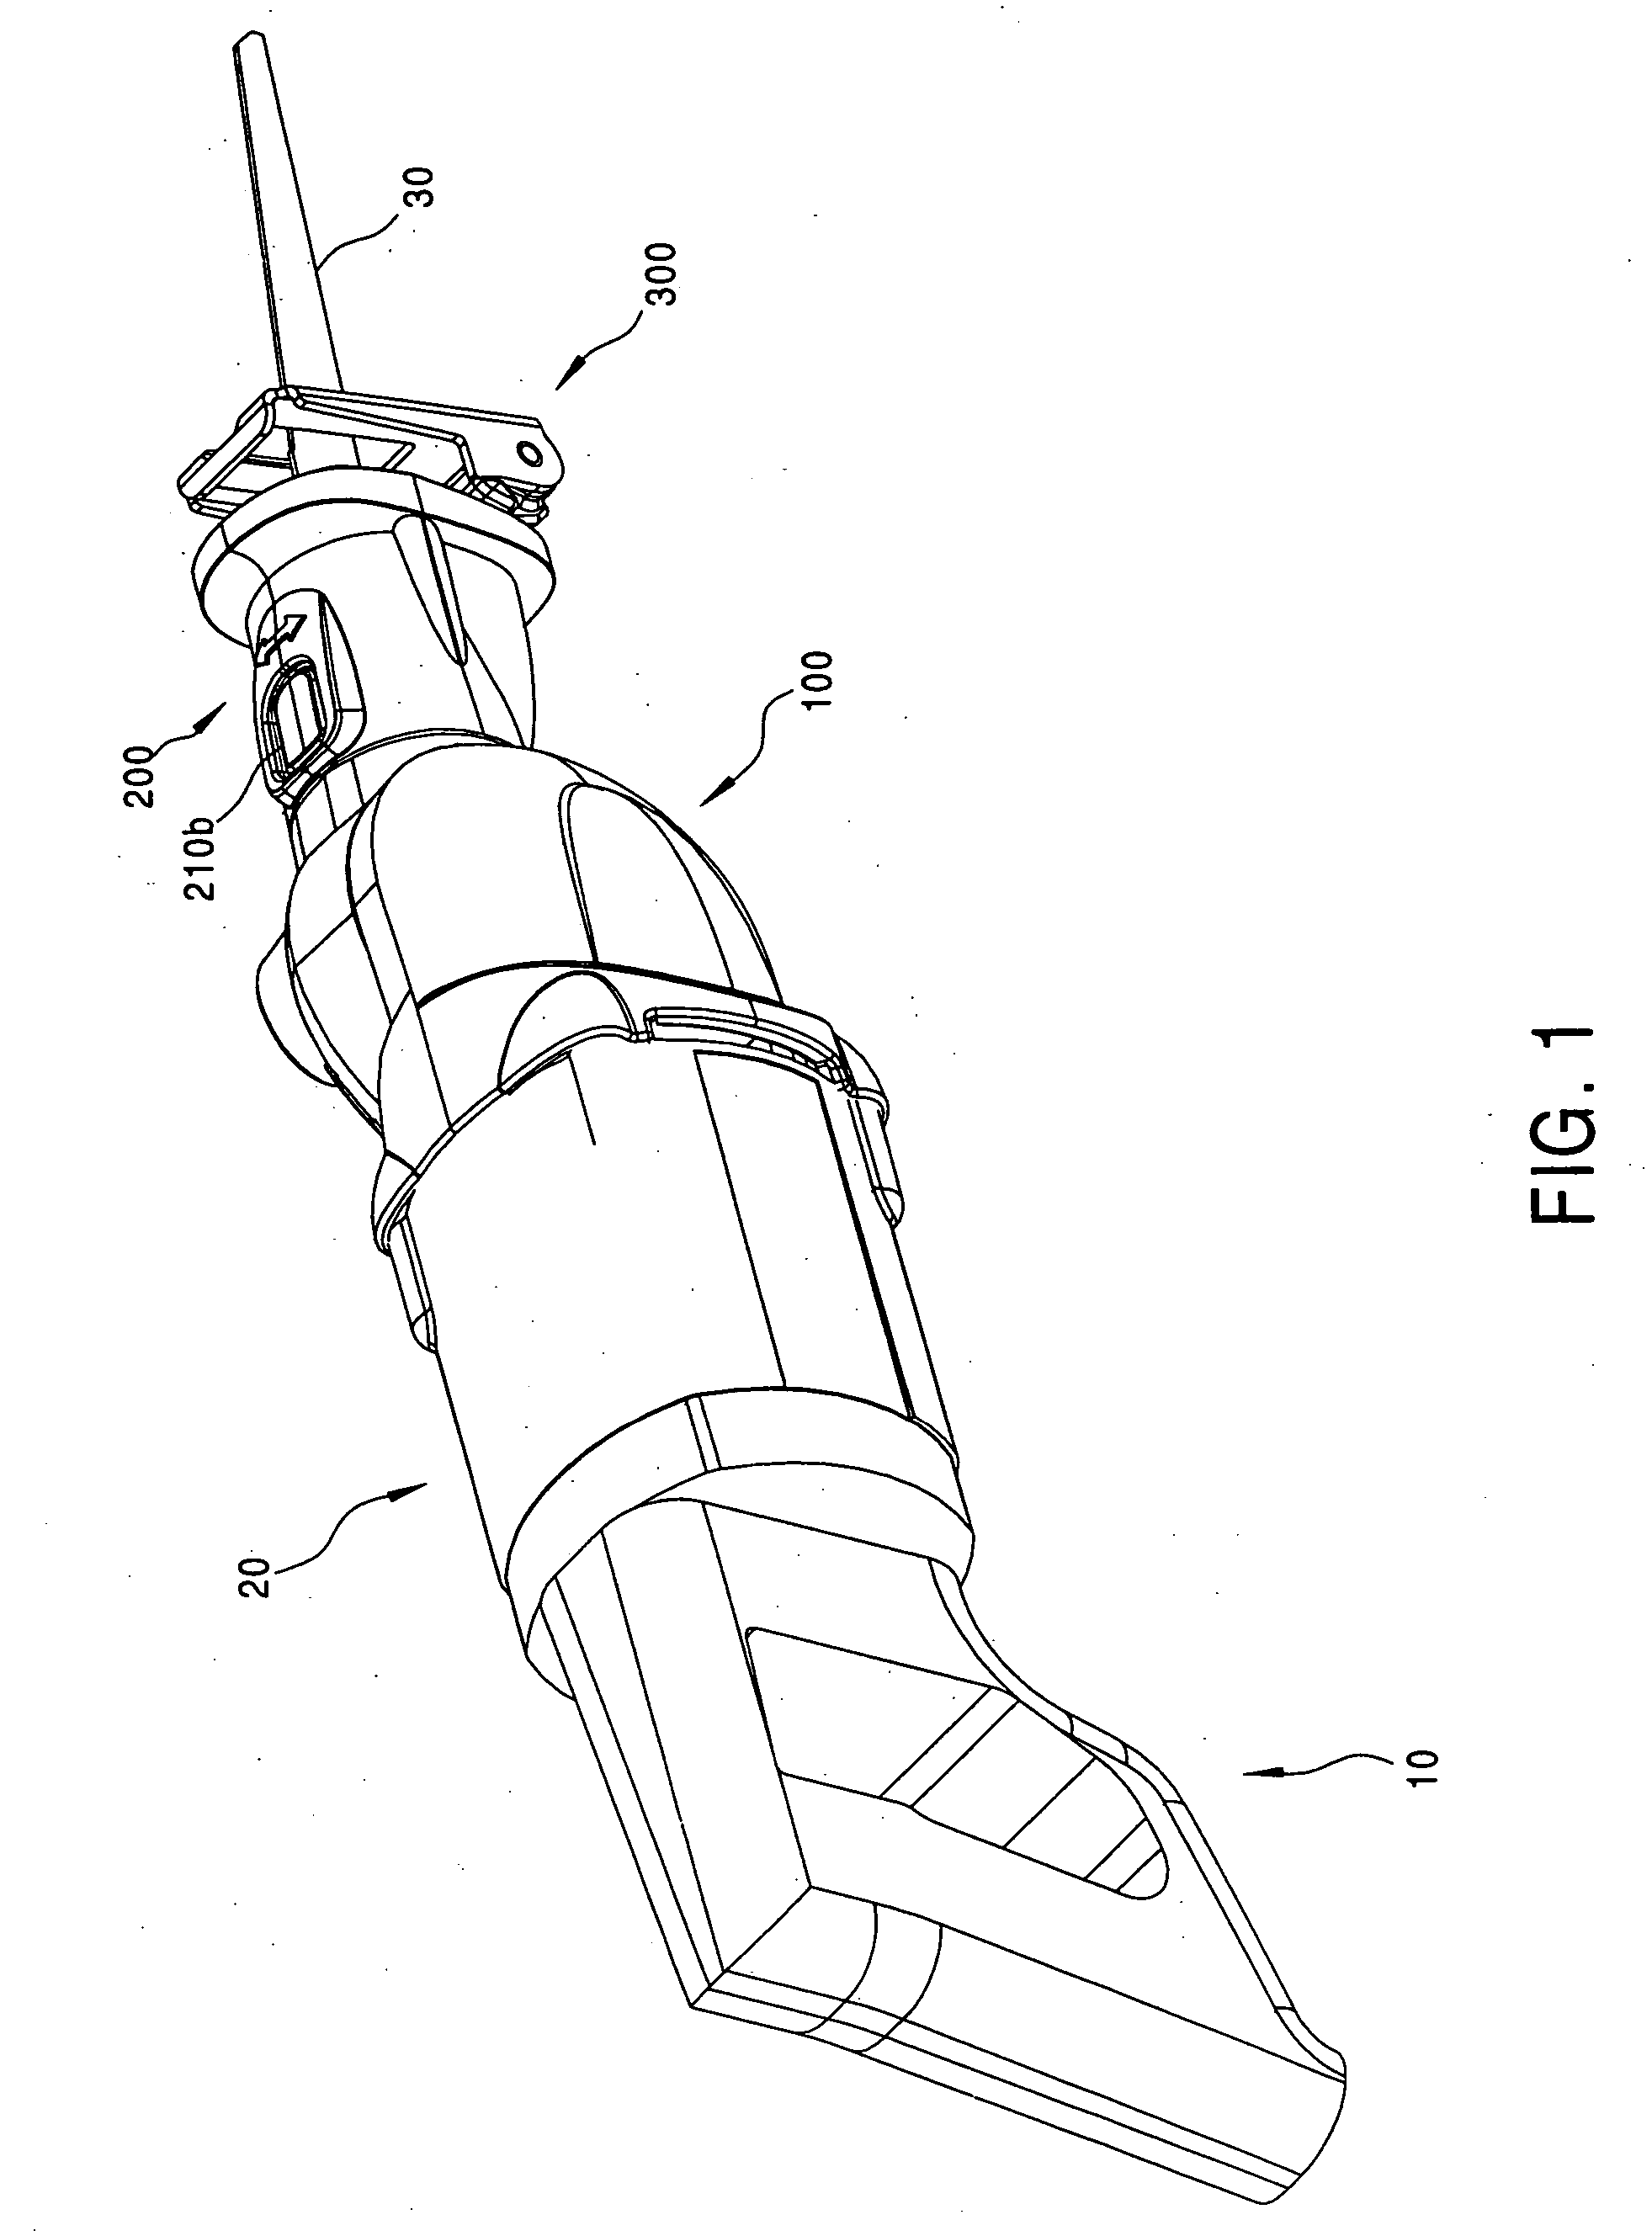 Bearing for a reciprocating shaft of a reciprocating saw